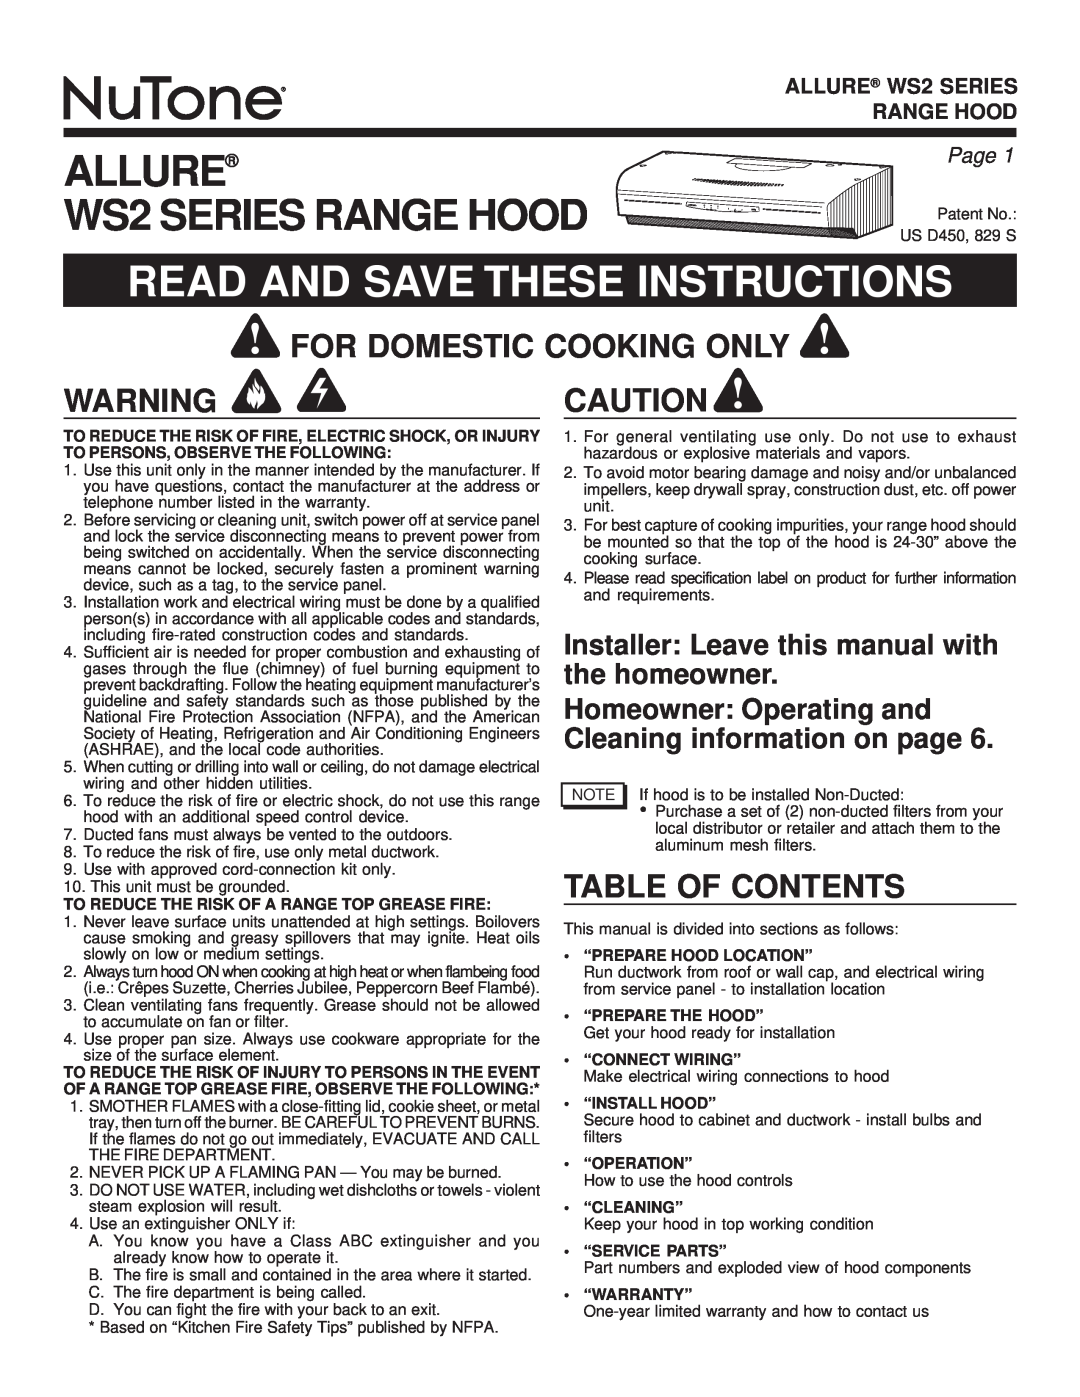 NuTone manual ALLURE WS2 SERIES RANGE HOOD, Read And Save These Instructions, For Domestic Cooking Only, Page 